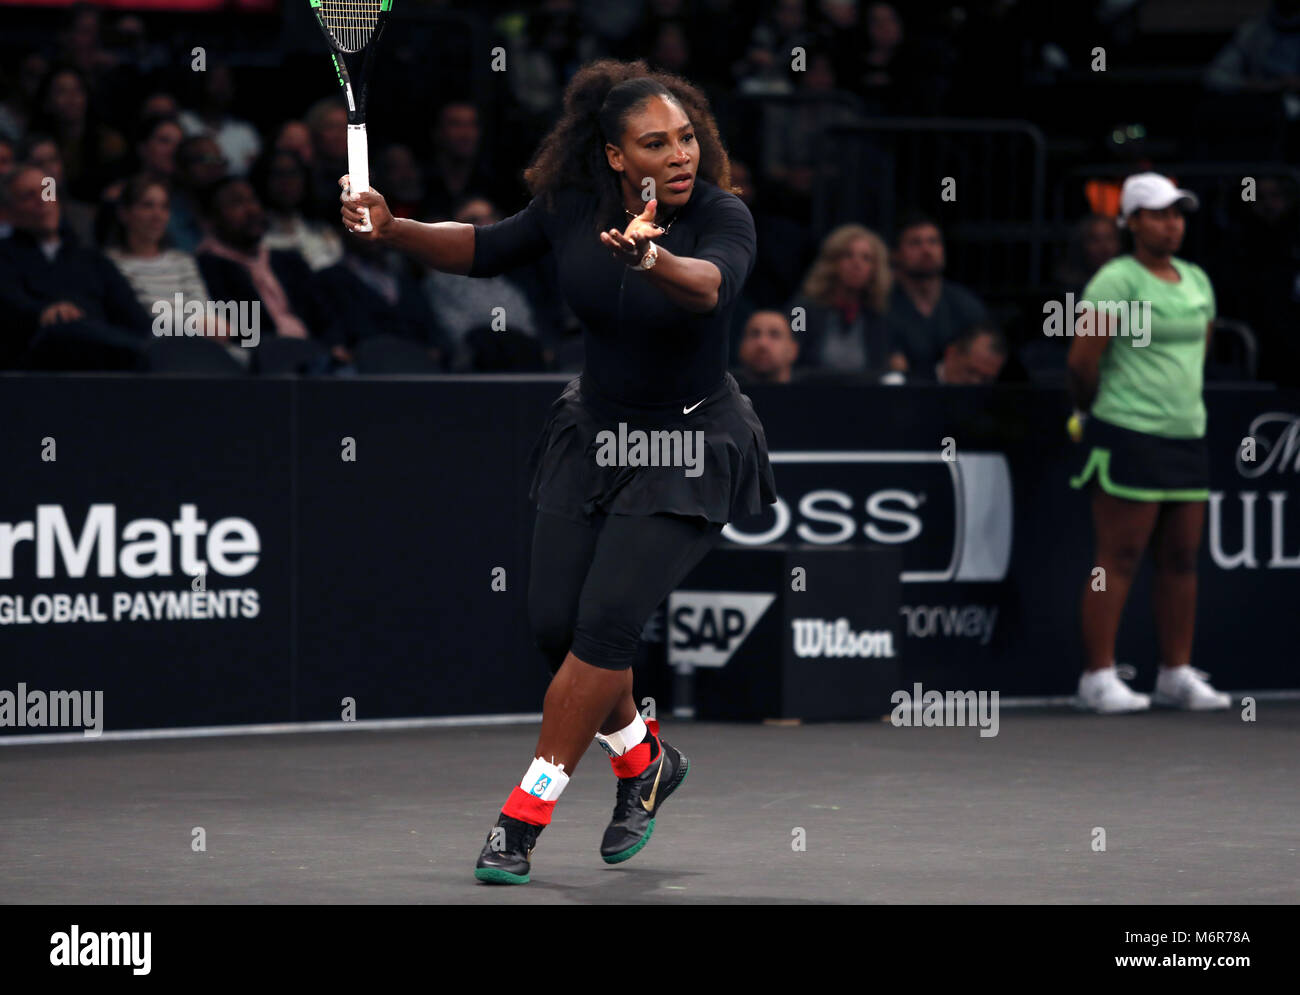 New York, USA. 5th March, 2018. Serena Williams in action against France's Marion Bartoli during the Tie Break Tens tennis tournament at Madison Square Garden in New York. The tournament features eight of the tours top female players competing for a $250,000 winners prize.  Williams has been returning to competition following the recent birth of her first child. Credit: Adam Stoltman/Alamy Live News Stock Photo